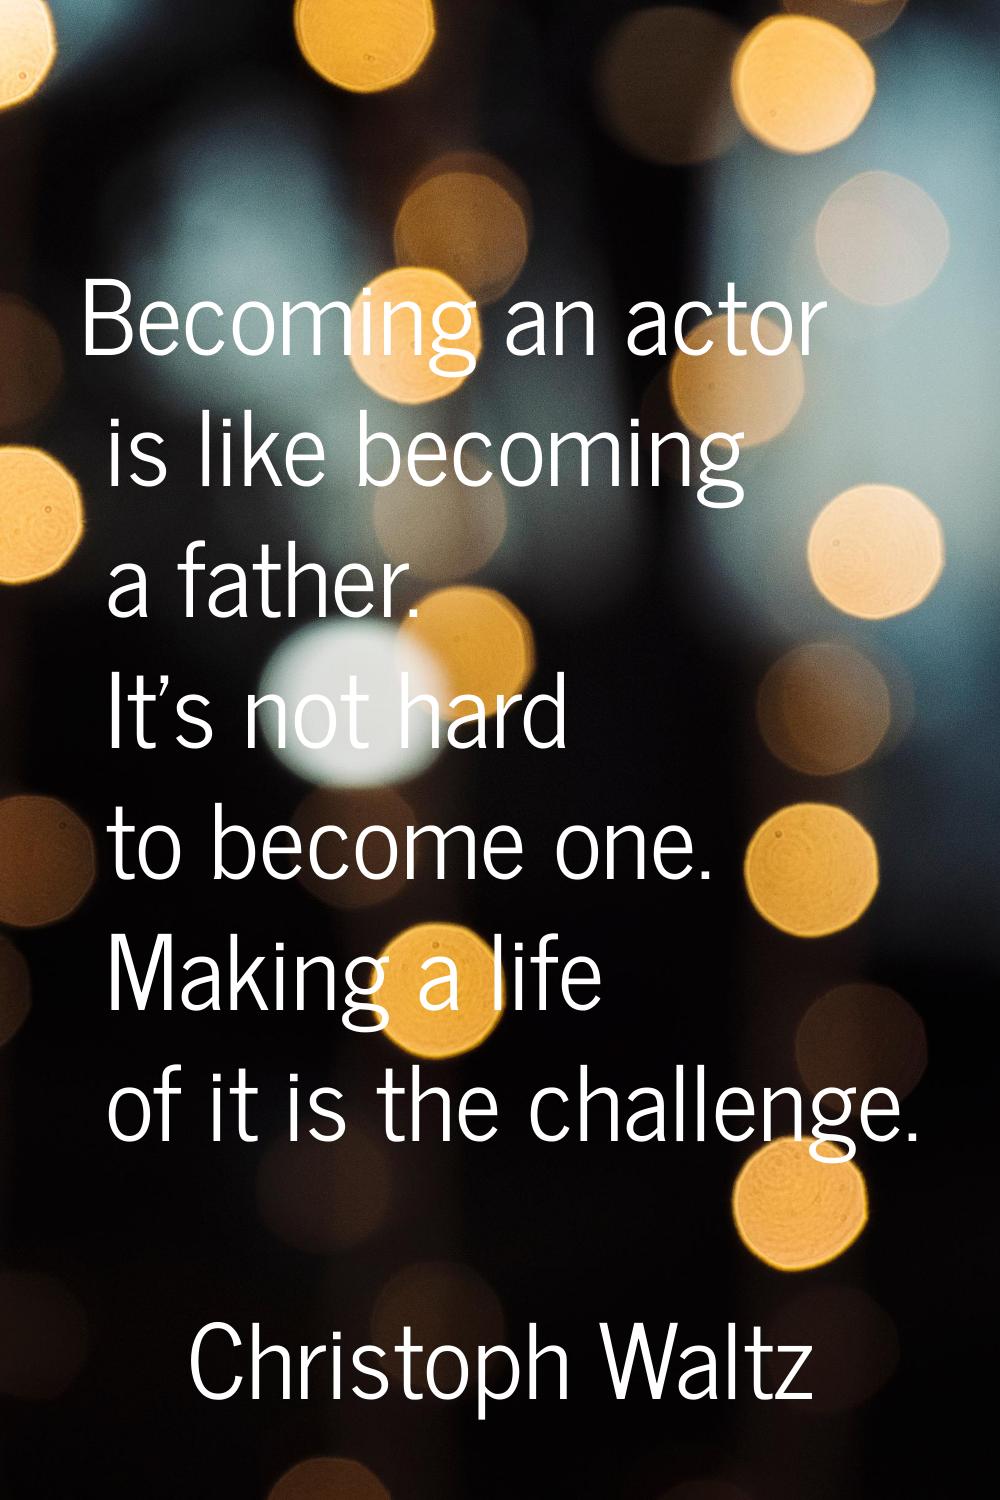 Becoming an actor is like becoming a father. It's not hard to become one. Making a life of it is th